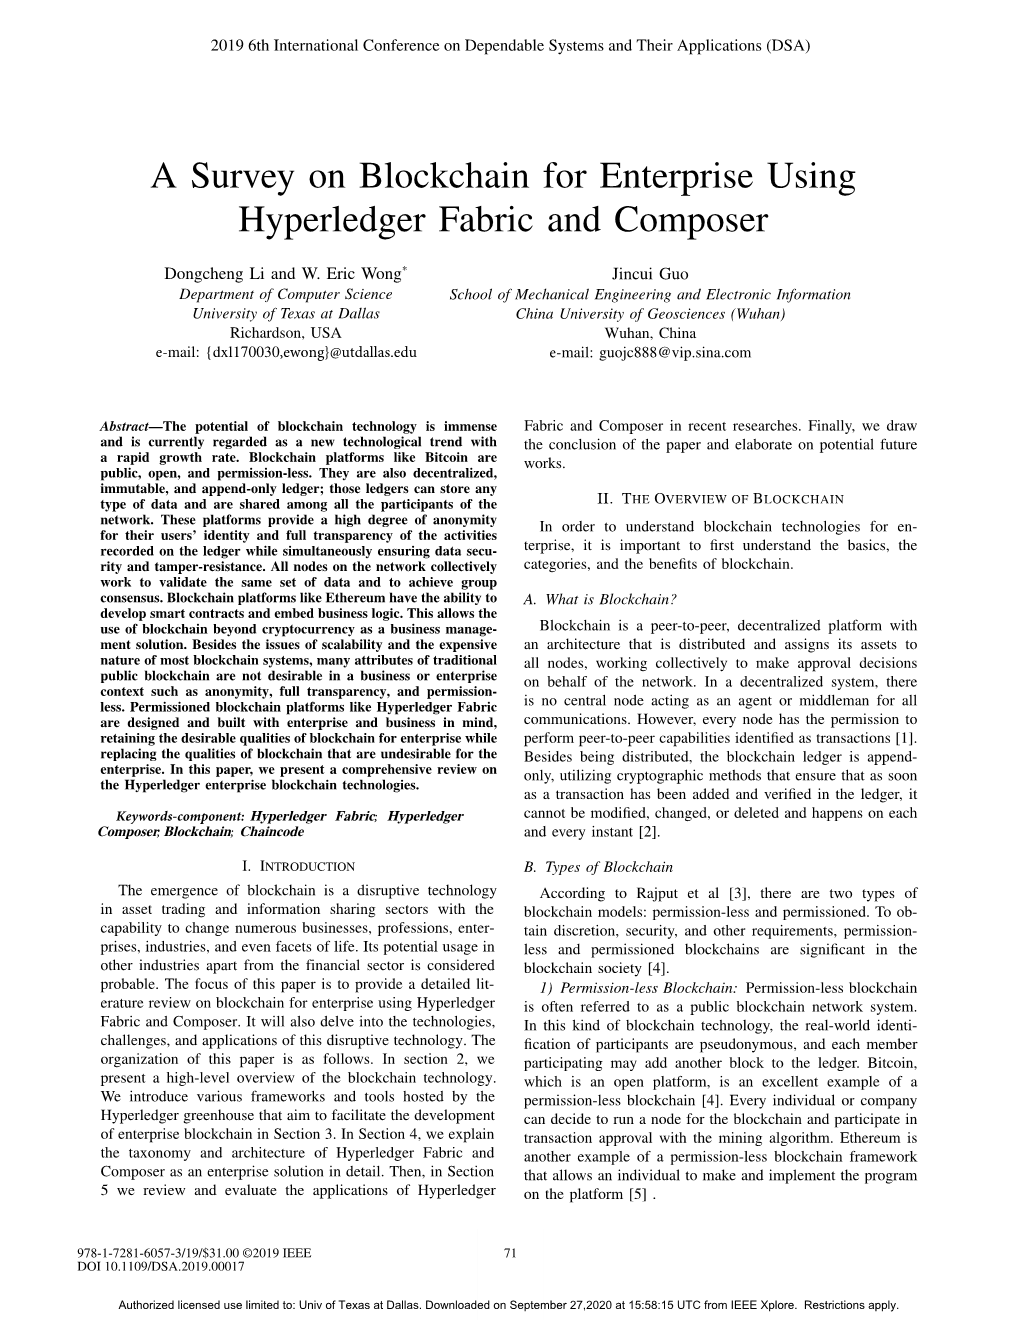 A Survey on Blockchain for Enterprise Using Hyperledger Fabric and Composer